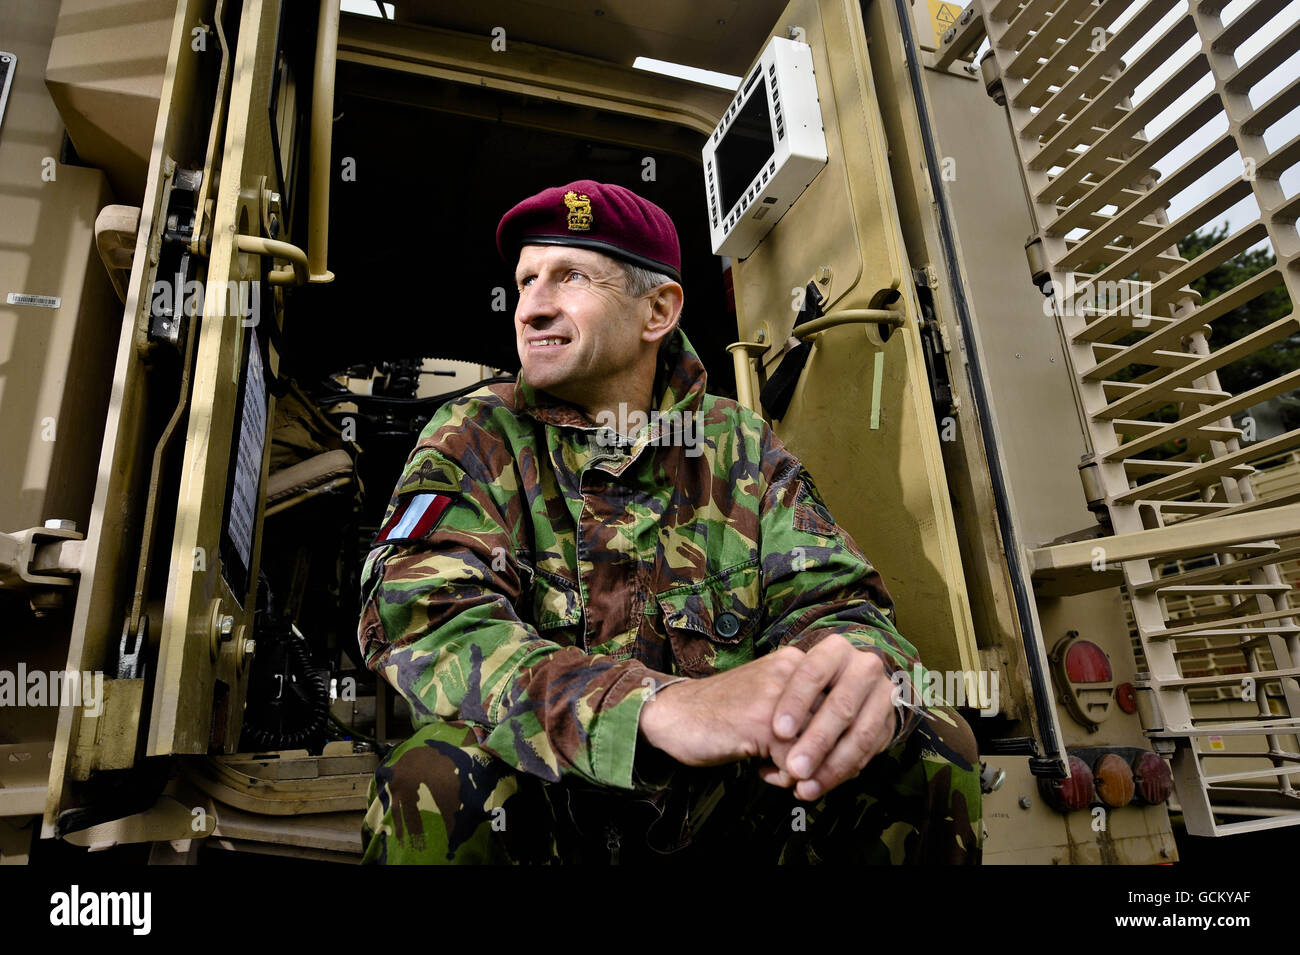 Brigadier James Chiswell MC, commander of 16 Air Assault Brigade, during a training exercise on Salisbury Plain. PRESS ASSOCIATION Photo. Picture date: Wednesday July 14, 2010. 16 Air Assault Brigade are due to deploy to Afghanistan on Operation HERRICK 13 later in the year. Photo credit should read: Ben Birchall/PA Wire Stock Photo